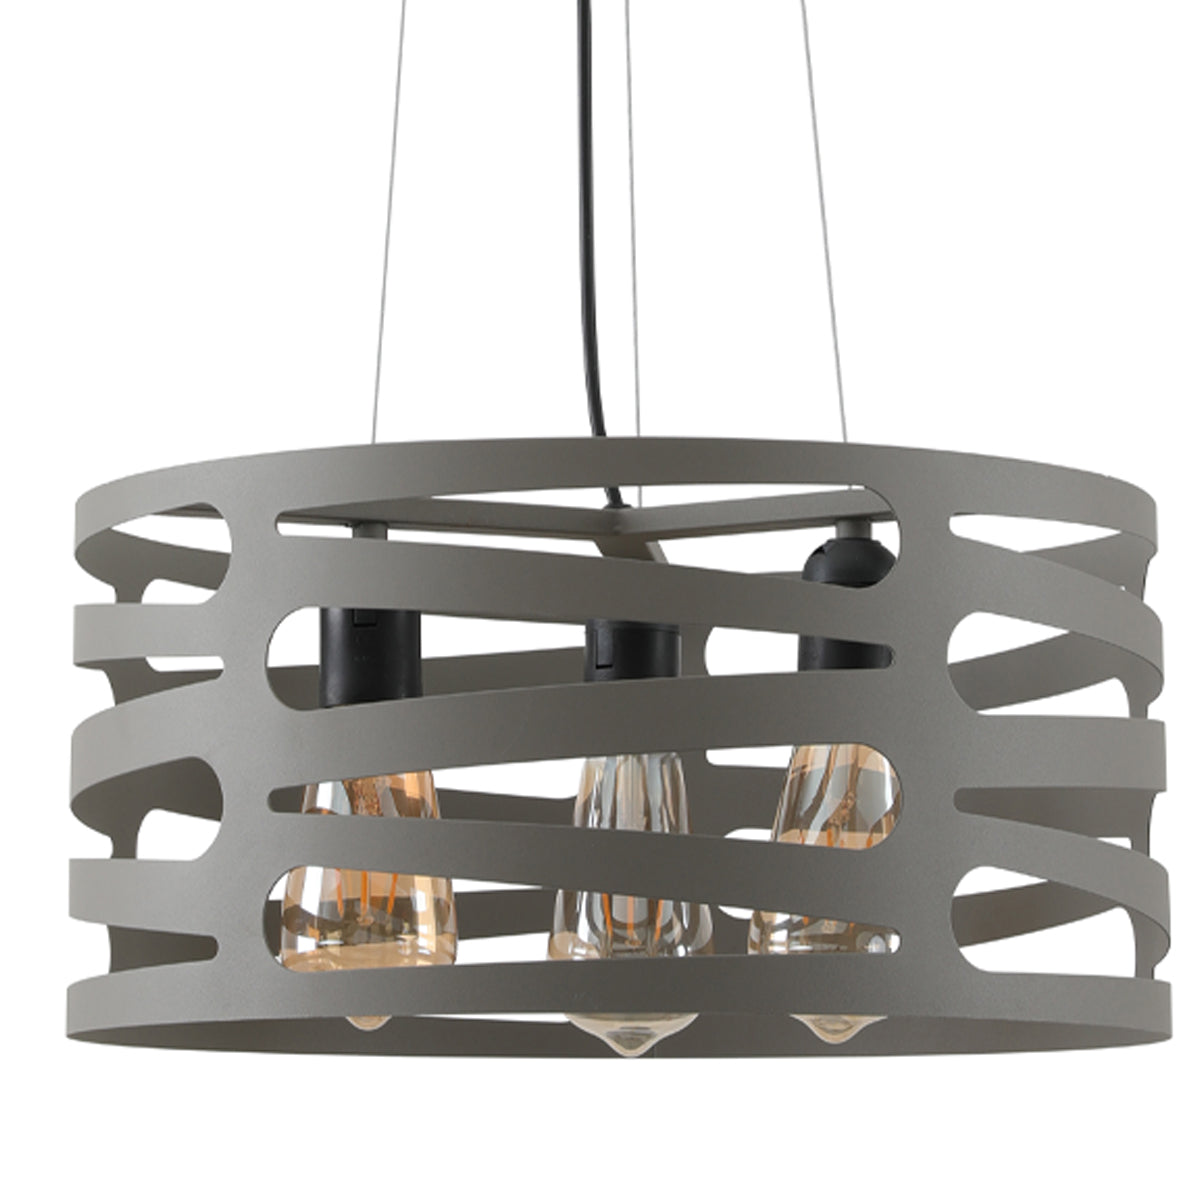 Our Marissa pendant ceiling Light is a strikingly beautiful fitting modern and contemporary in its appearance. This pendant light is constructed from a metal circular shade with laser cut outs and comes complete with a black adjustable cord and matching ceiling rose. When lit this light creates something spectacular as the light shines through the cut out shapes. 